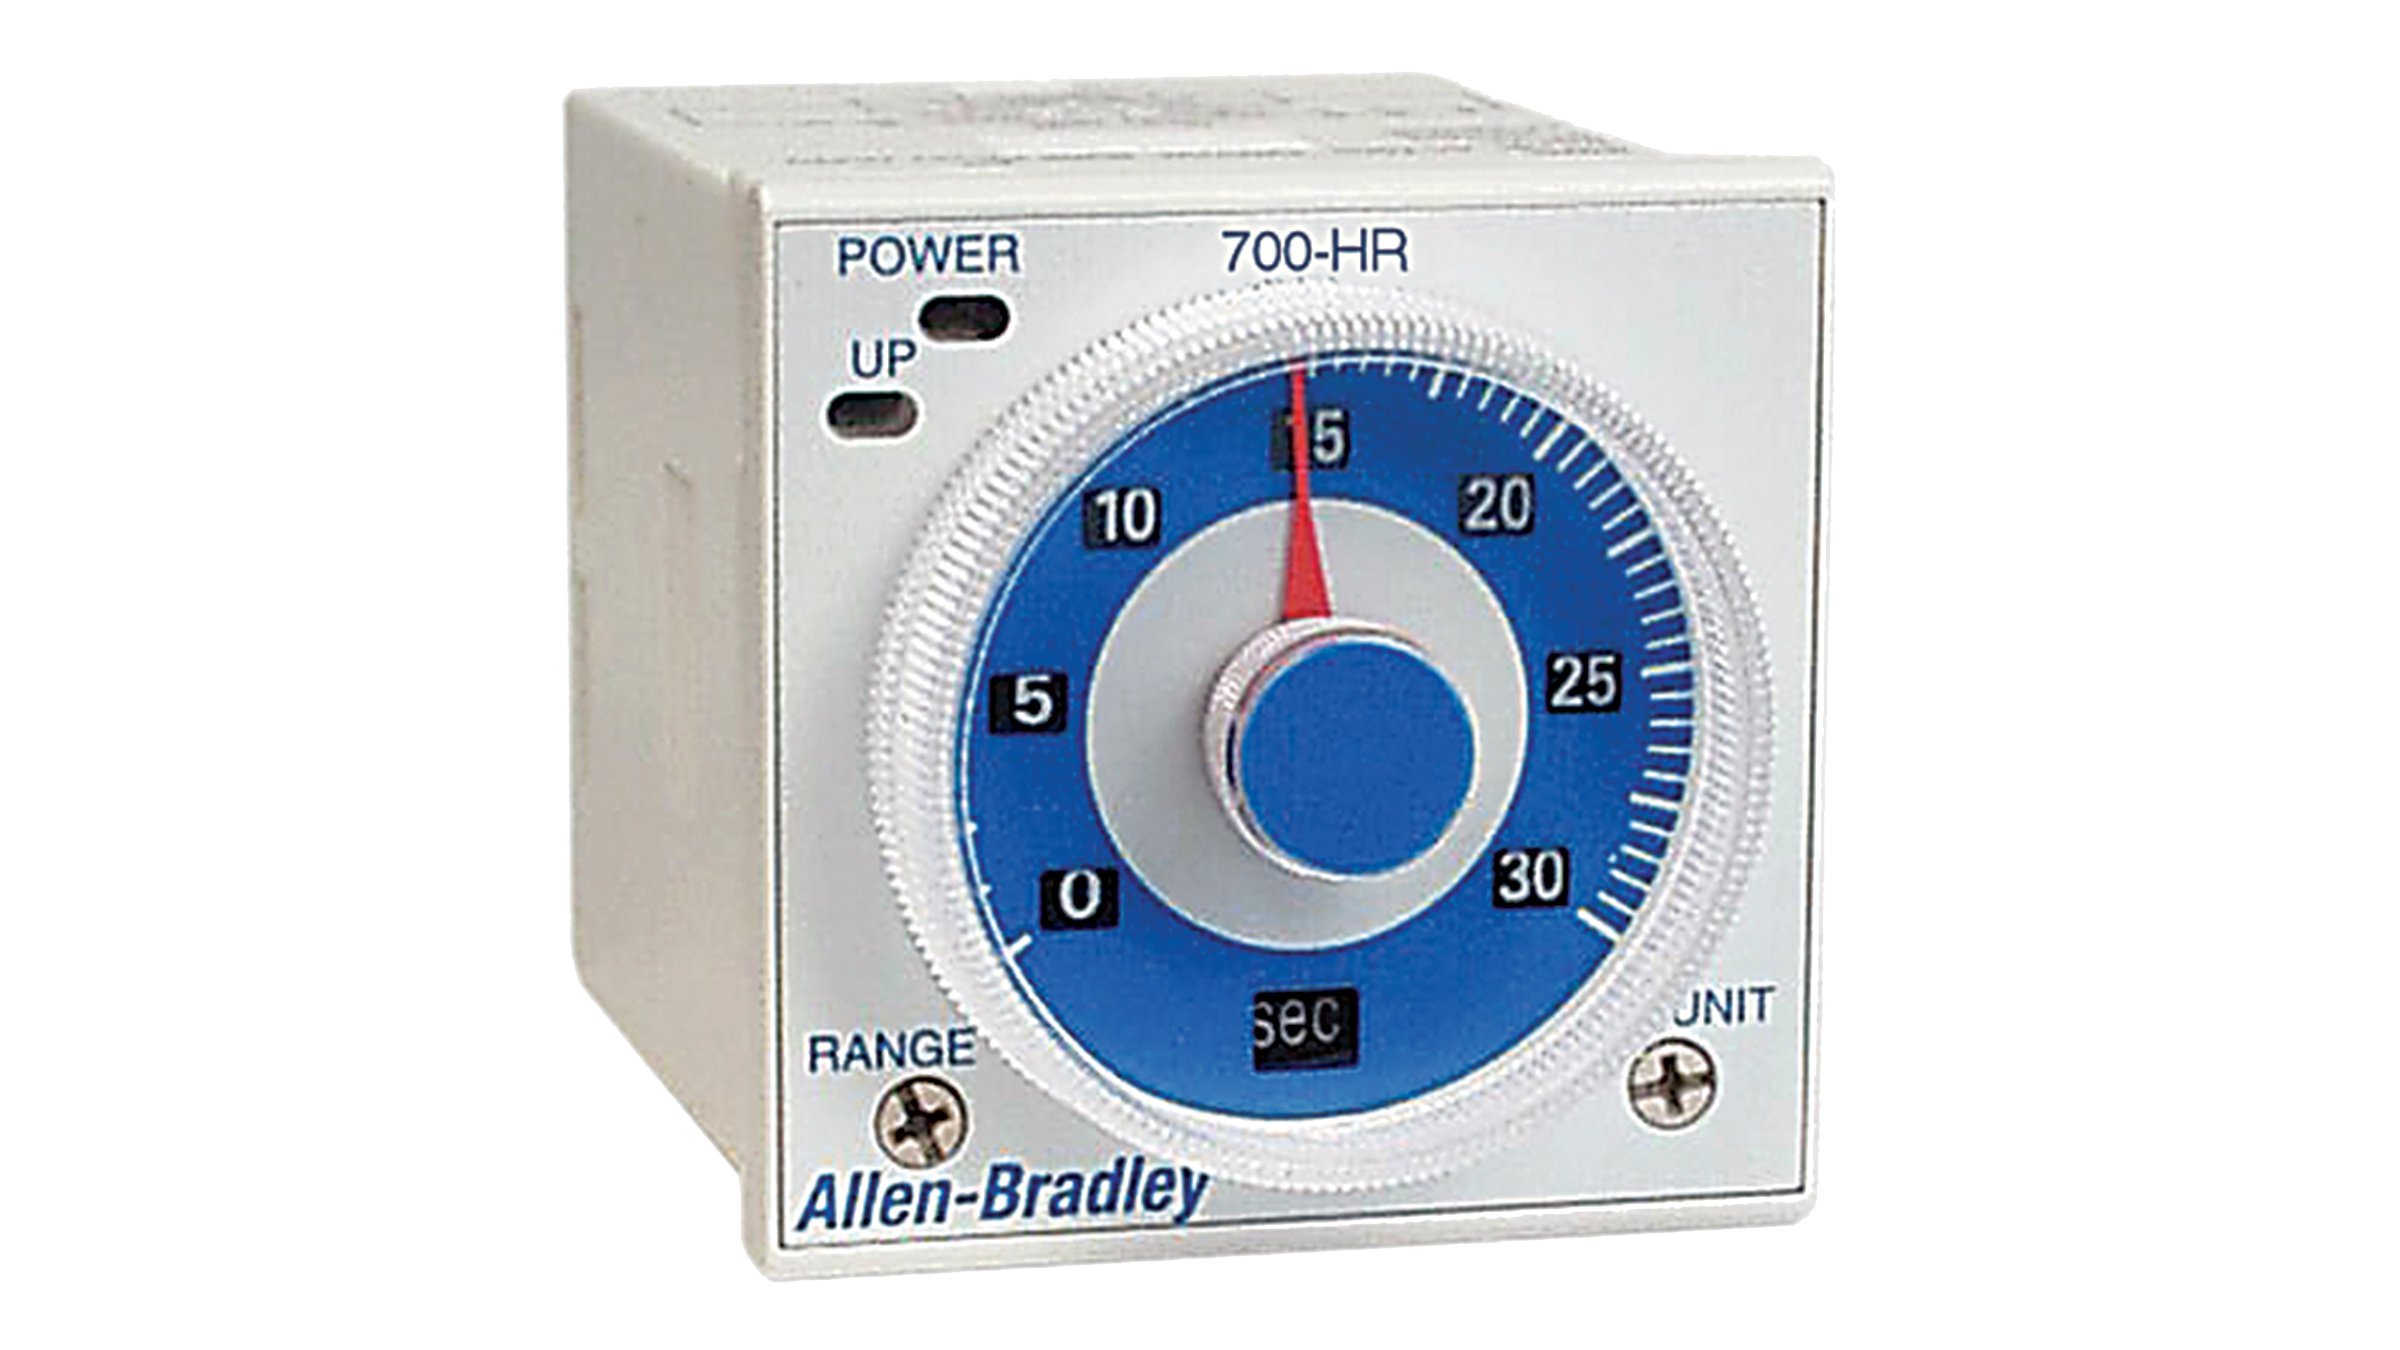 Allen-Bradley Bulletin 700-HR Dial Timing Relays are plug-in socket-mounted timing relays.